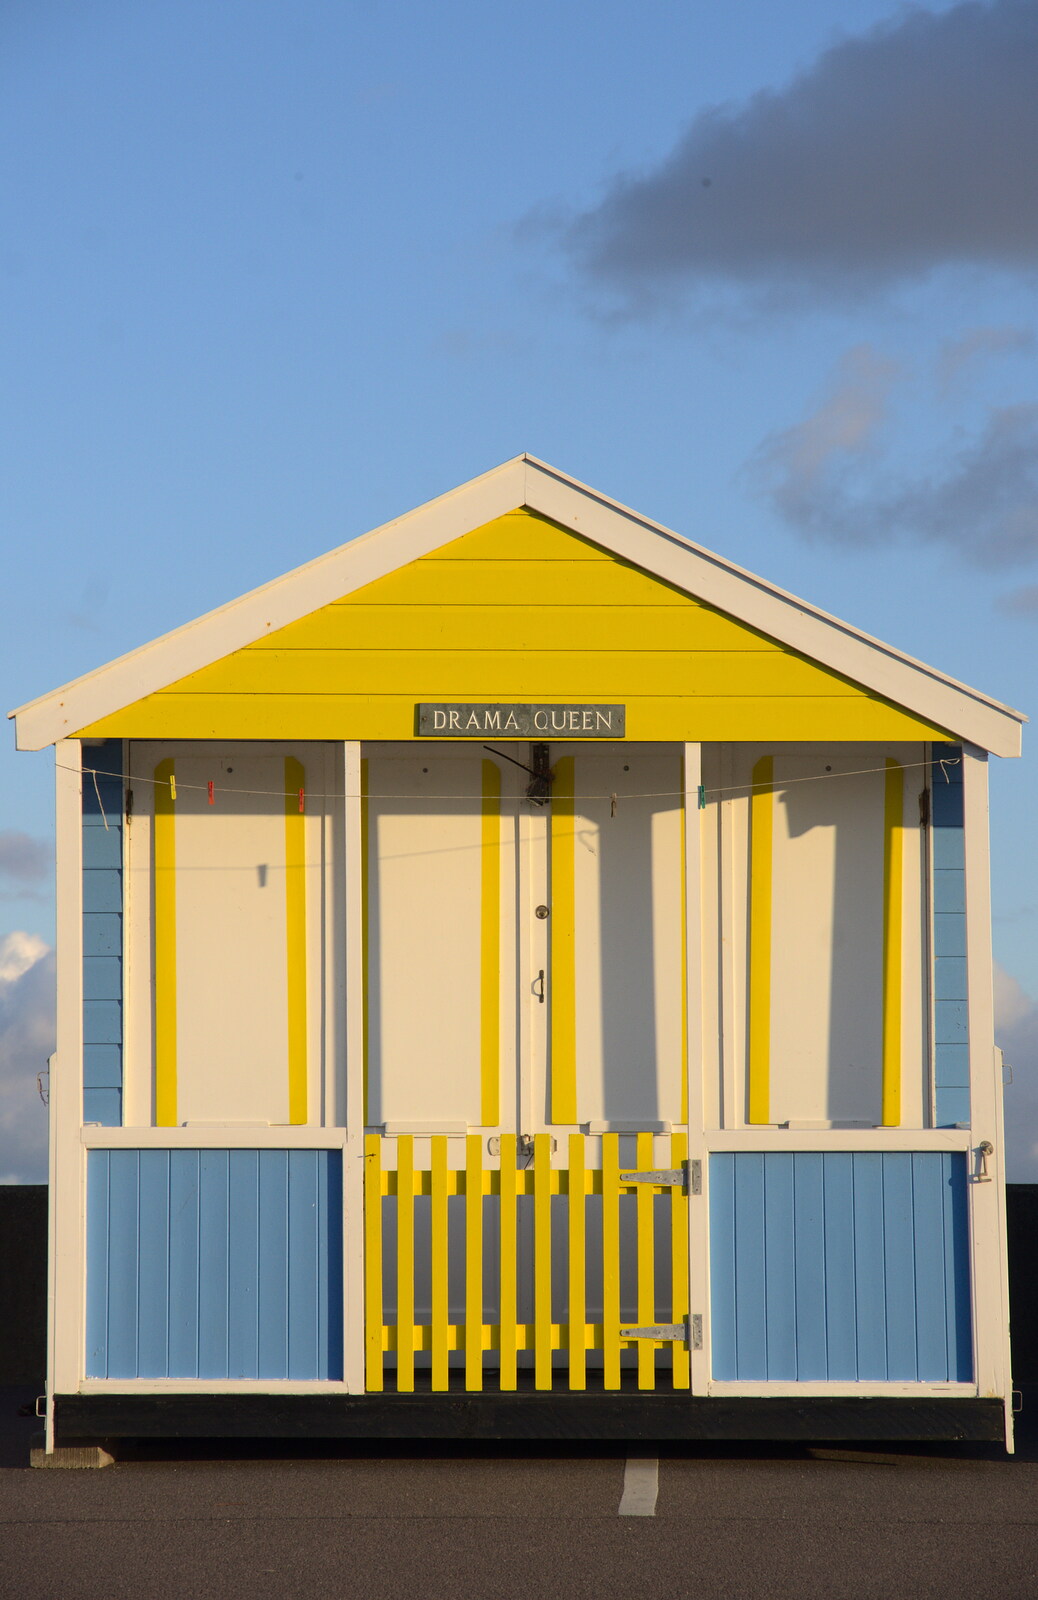 The Drama Queen beach hut from A Trip to the Amusements, Southwold Pier, Southwold, Suffolk - 5th November 2017